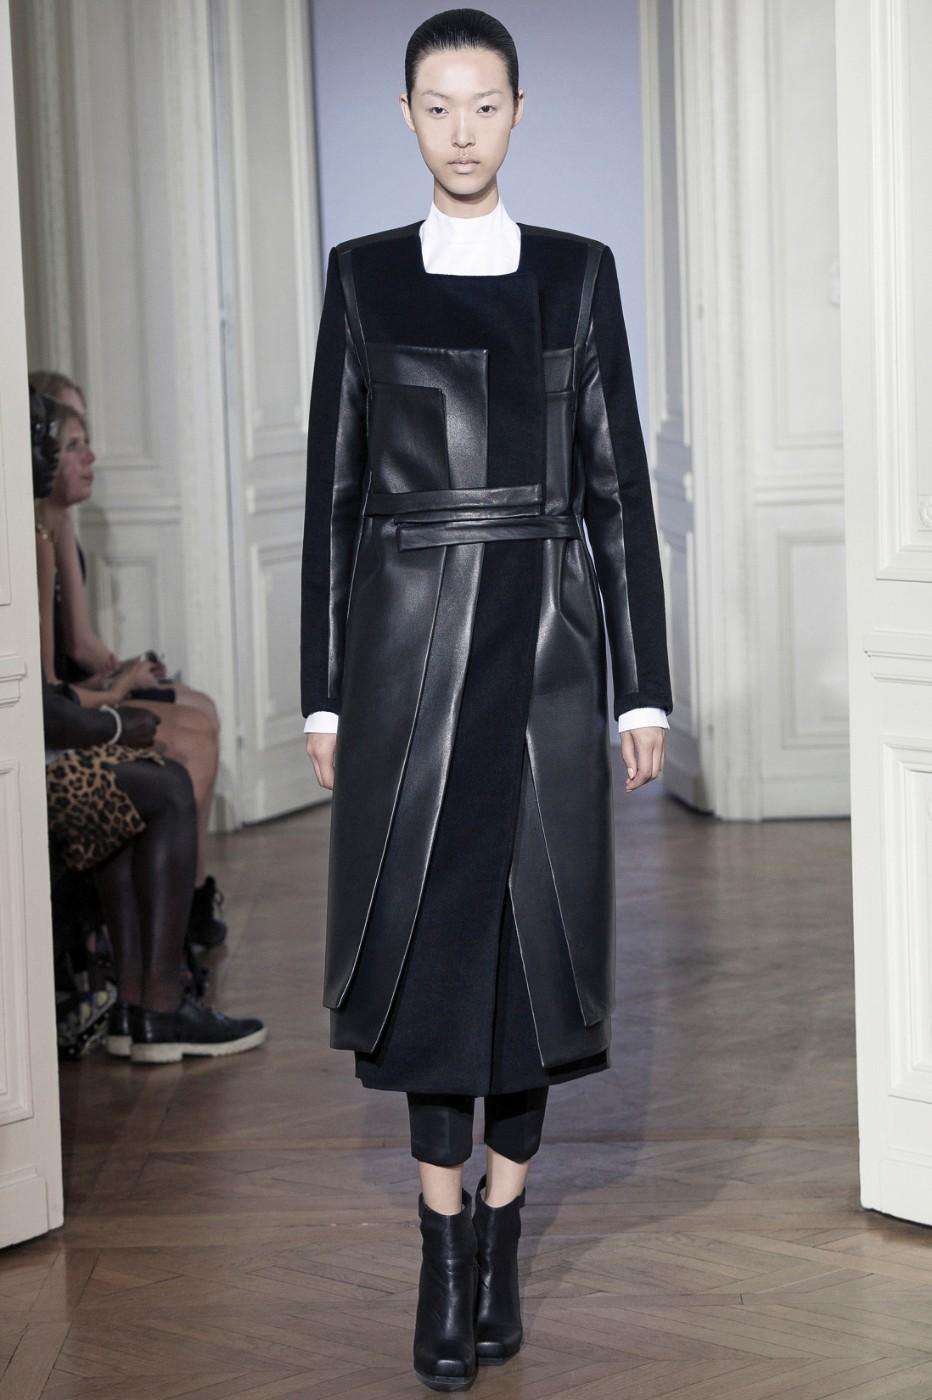 Unisex Couture Look #3 – Coat – From Rad Hourani Unisex Couture Collection #9 Paris, Fall/Winter 2012. Rad Hourani (Canadian, born in Jordan 1982). 